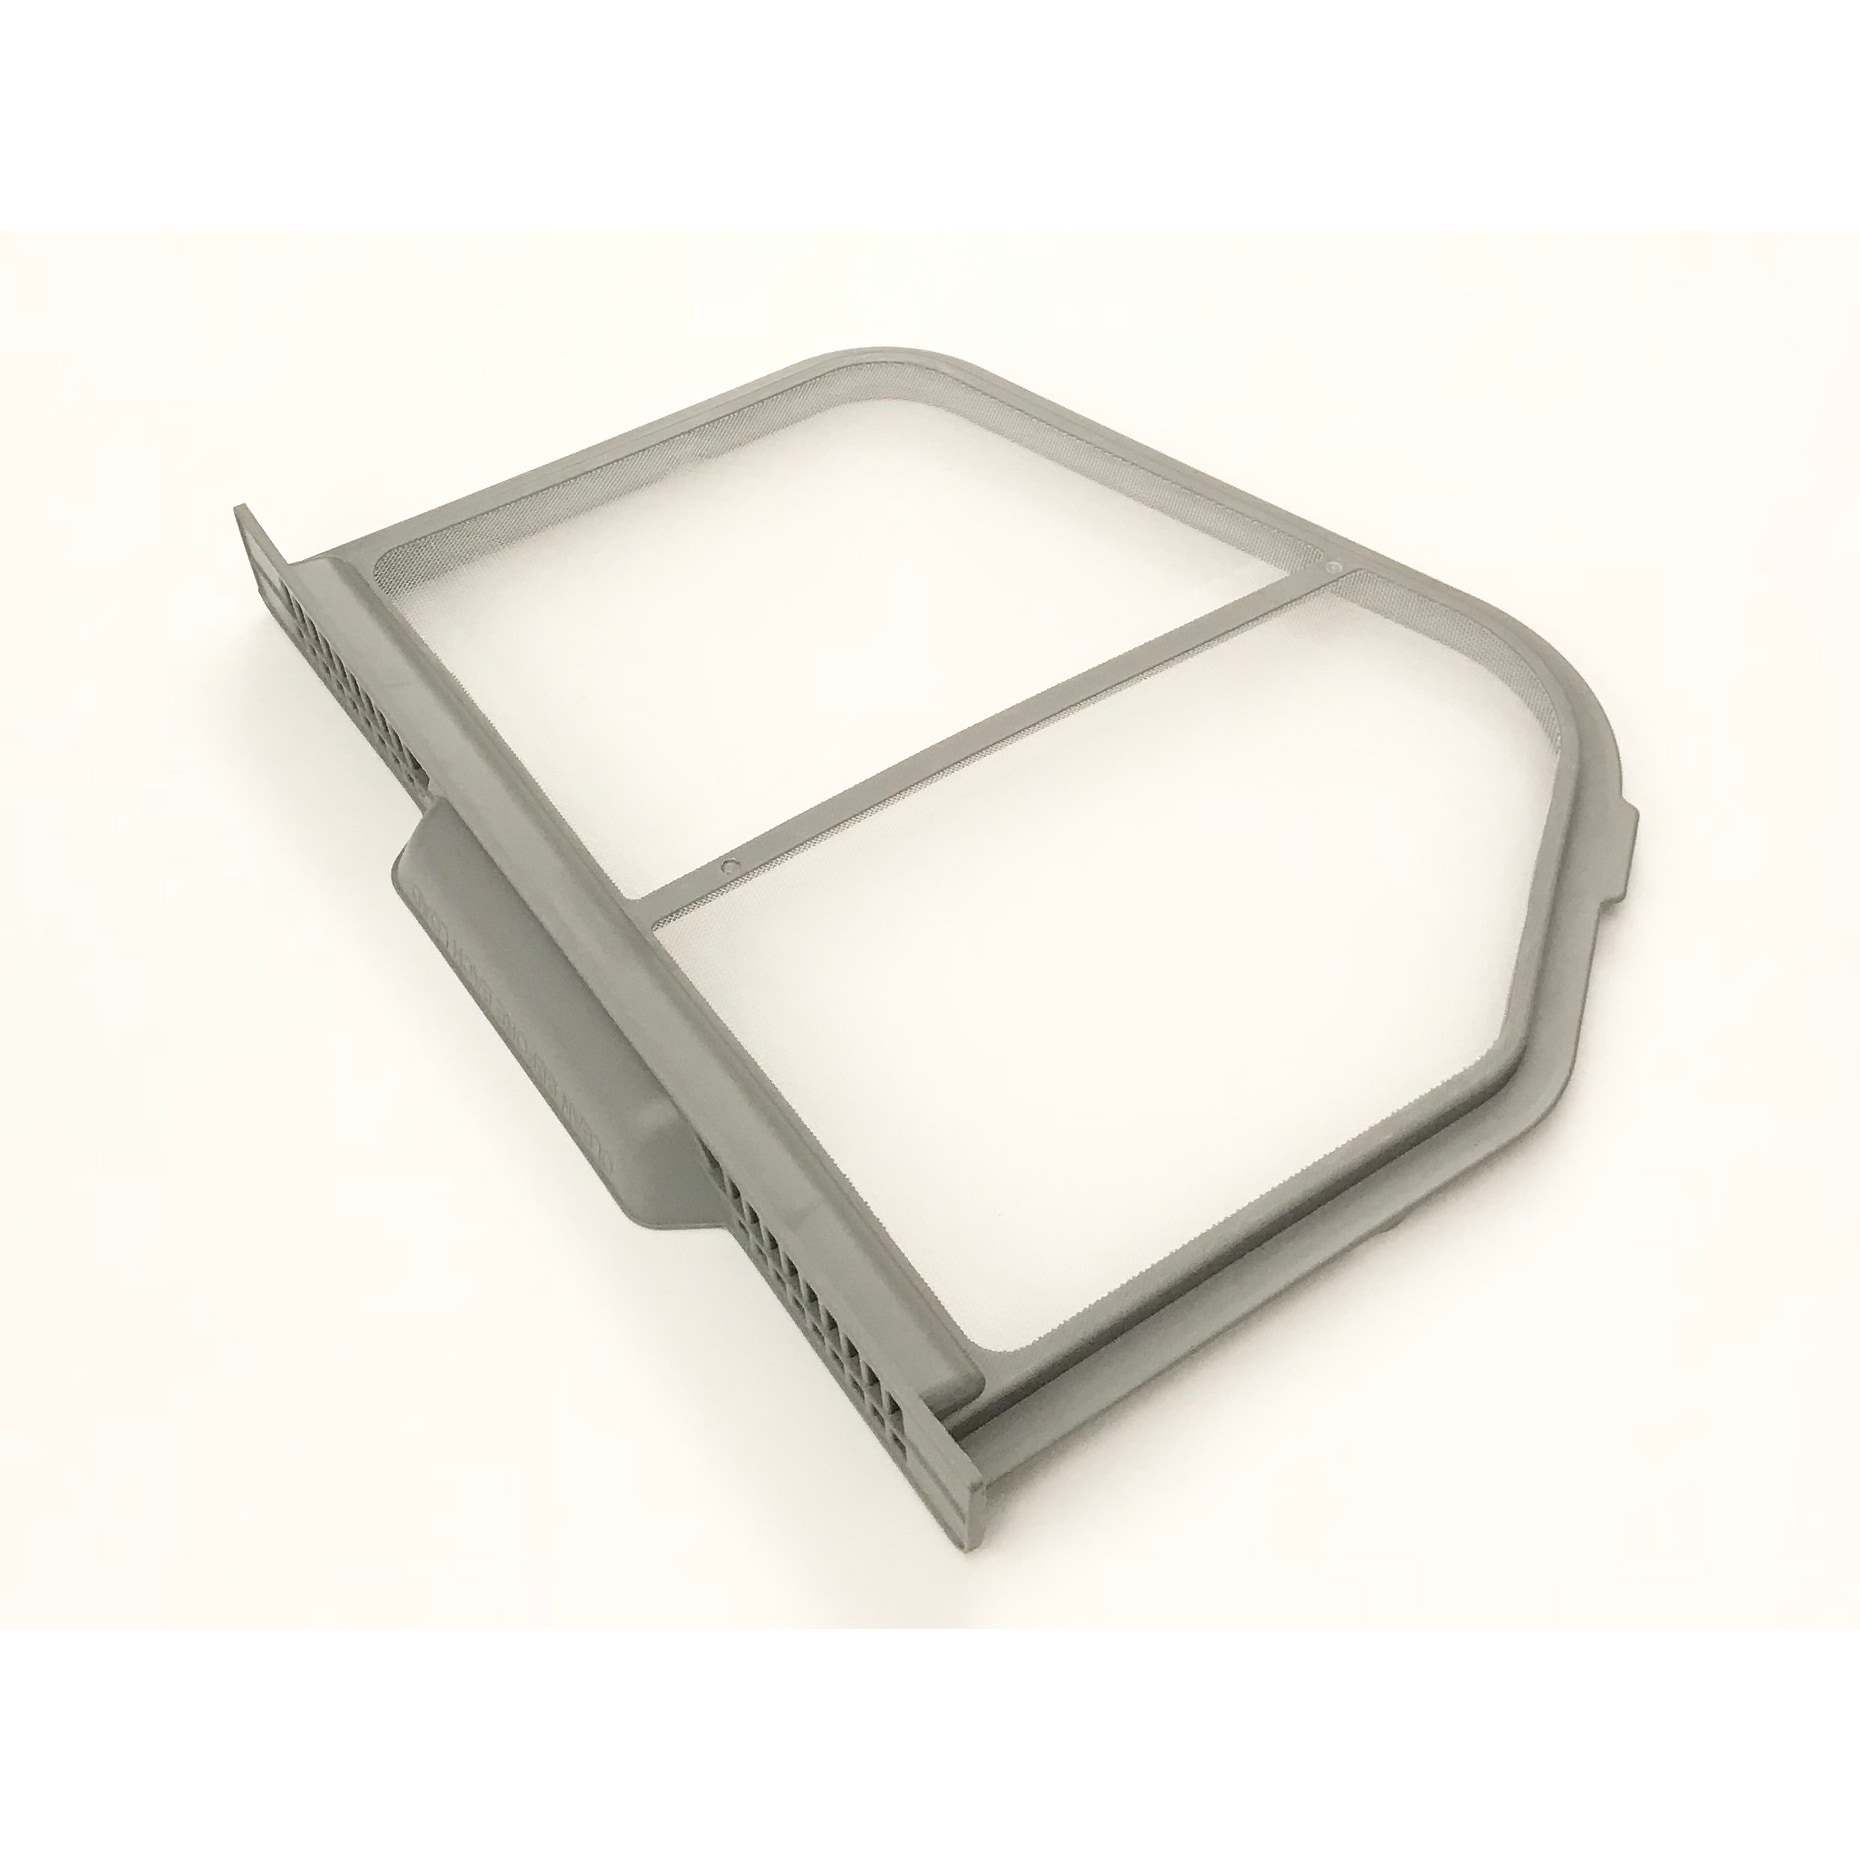 NEW OEM Samsung Lint Filter Screen Shipped With DV...